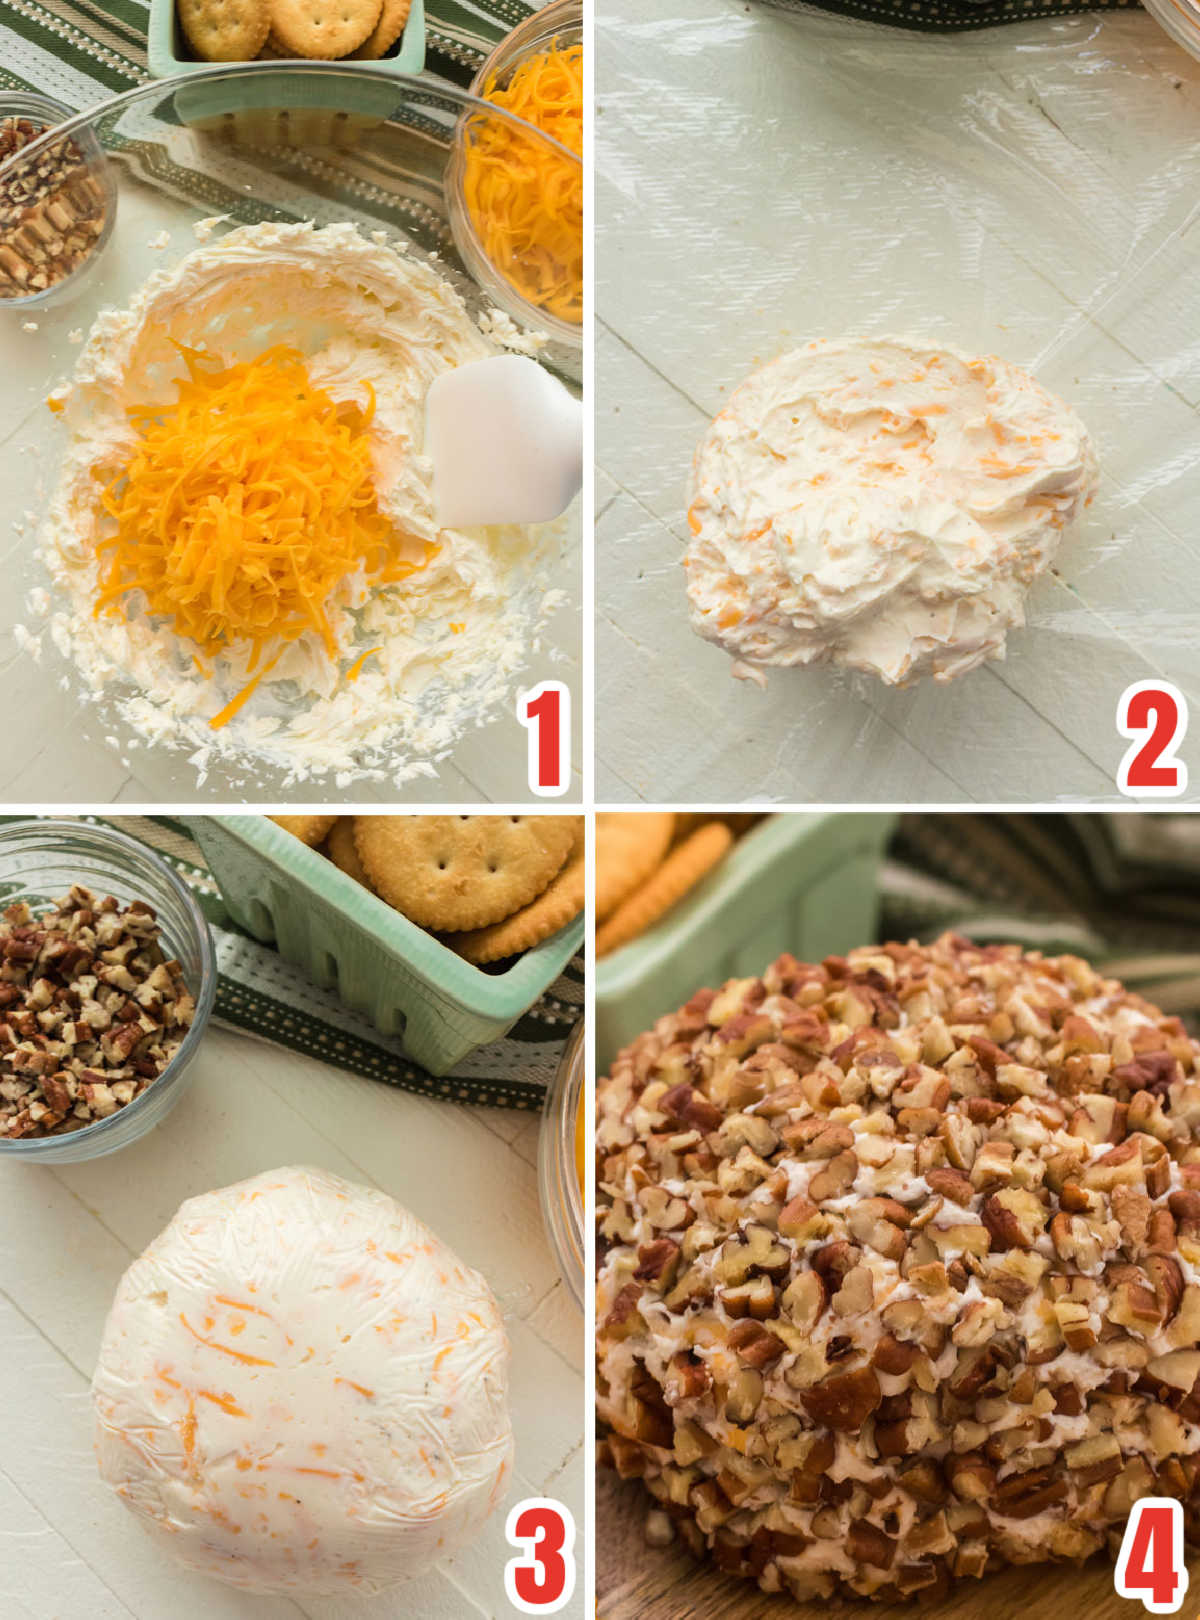 Collage image showing the steps for making a cheese ball.